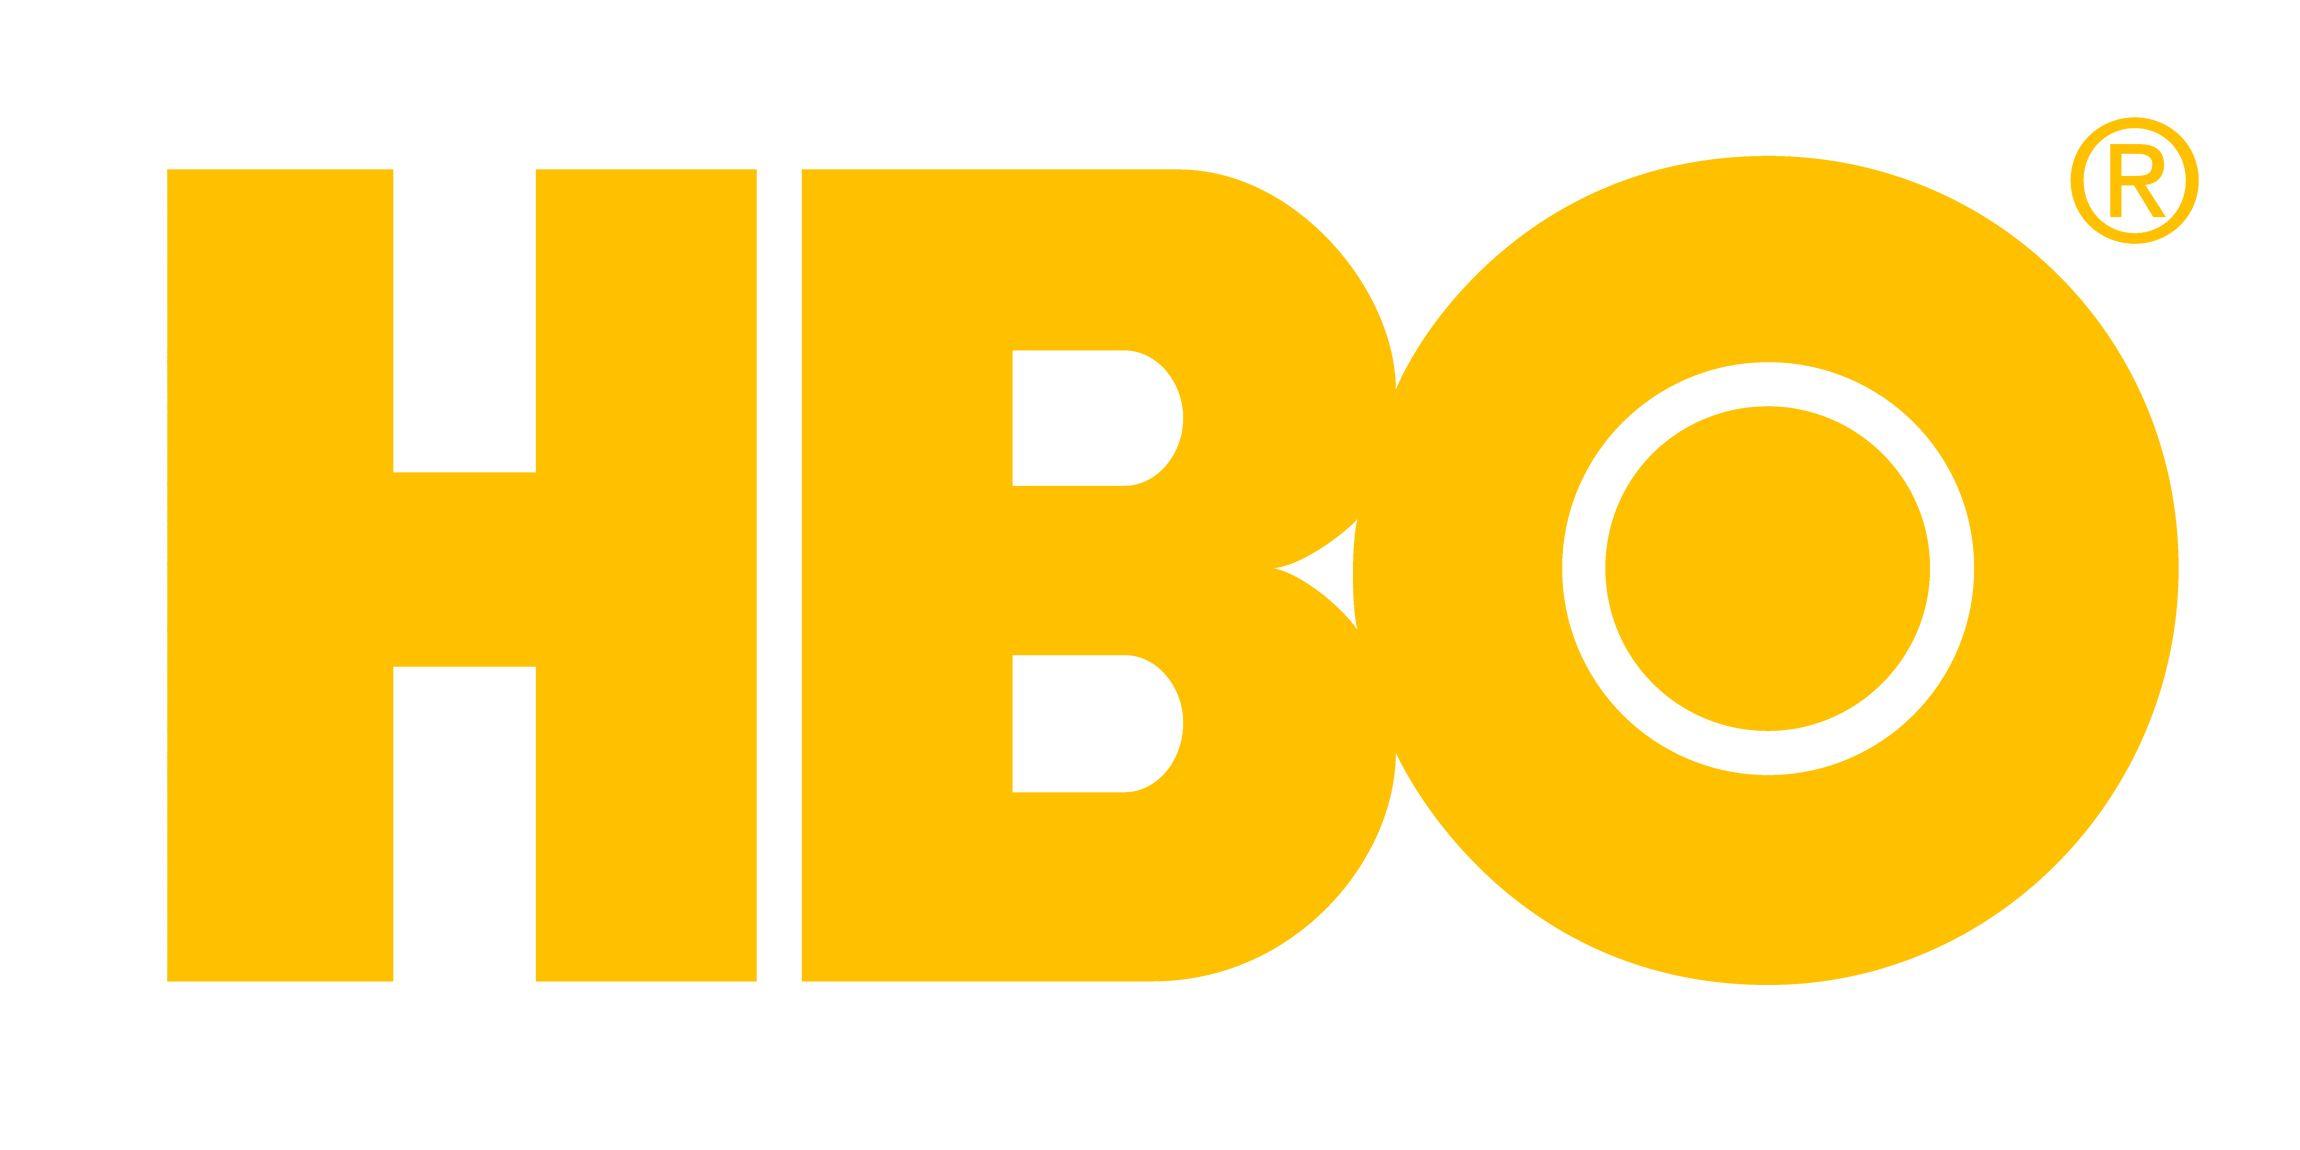 HBO Logo - HBO Logo, Home Box Office symbol, meaning